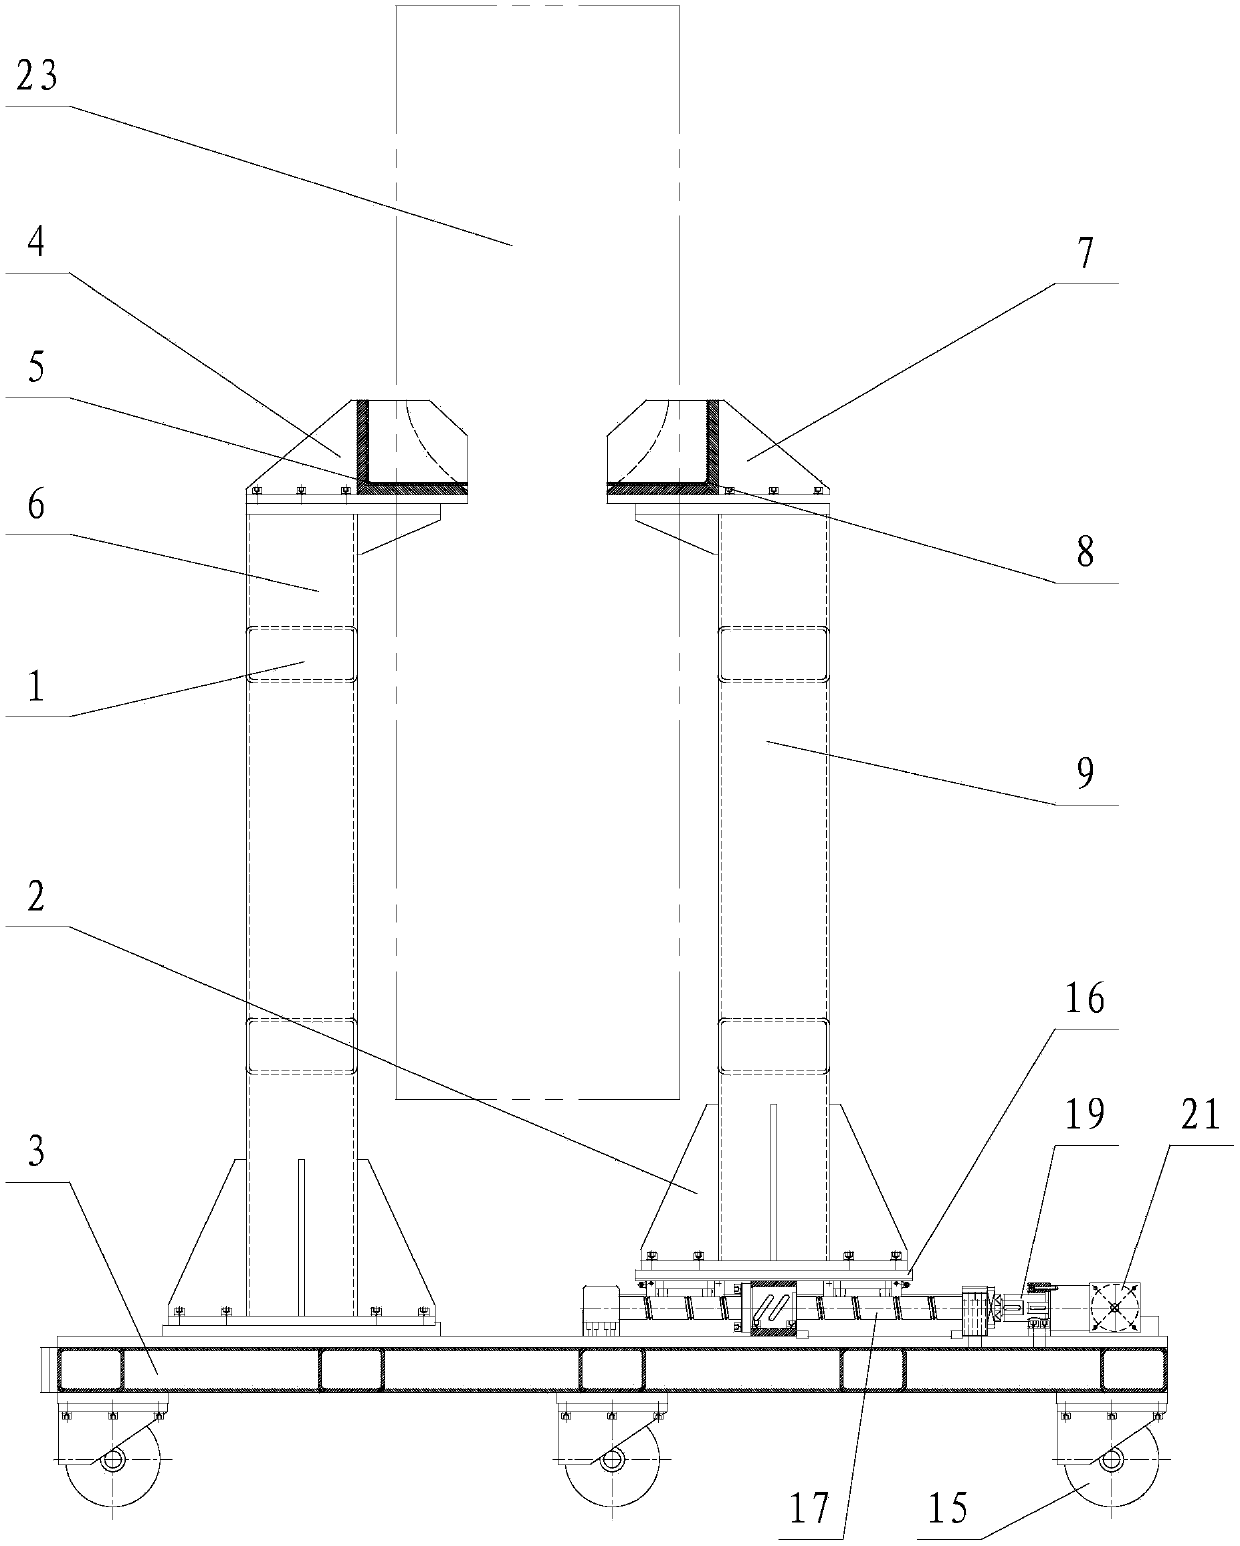 Movable heavy-load pallet based on clamping self-adaptive adjustment